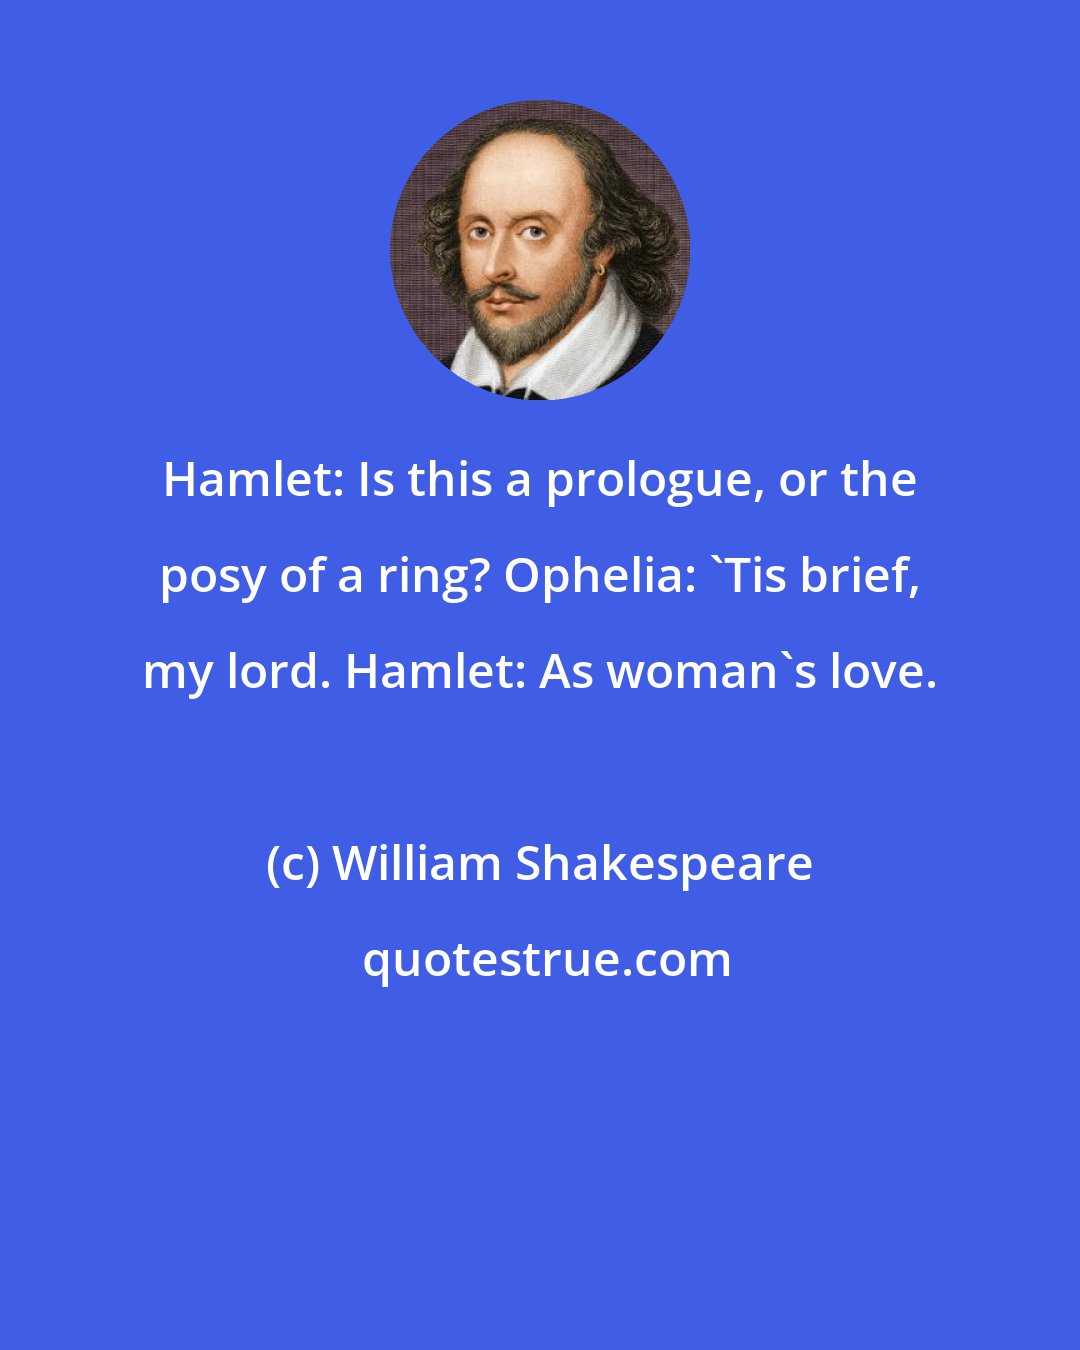 William Shakespeare: Hamlet: Is this a prologue, or the posy of a ring? Ophelia: 'Tis brief, my lord. Hamlet: As woman's love.